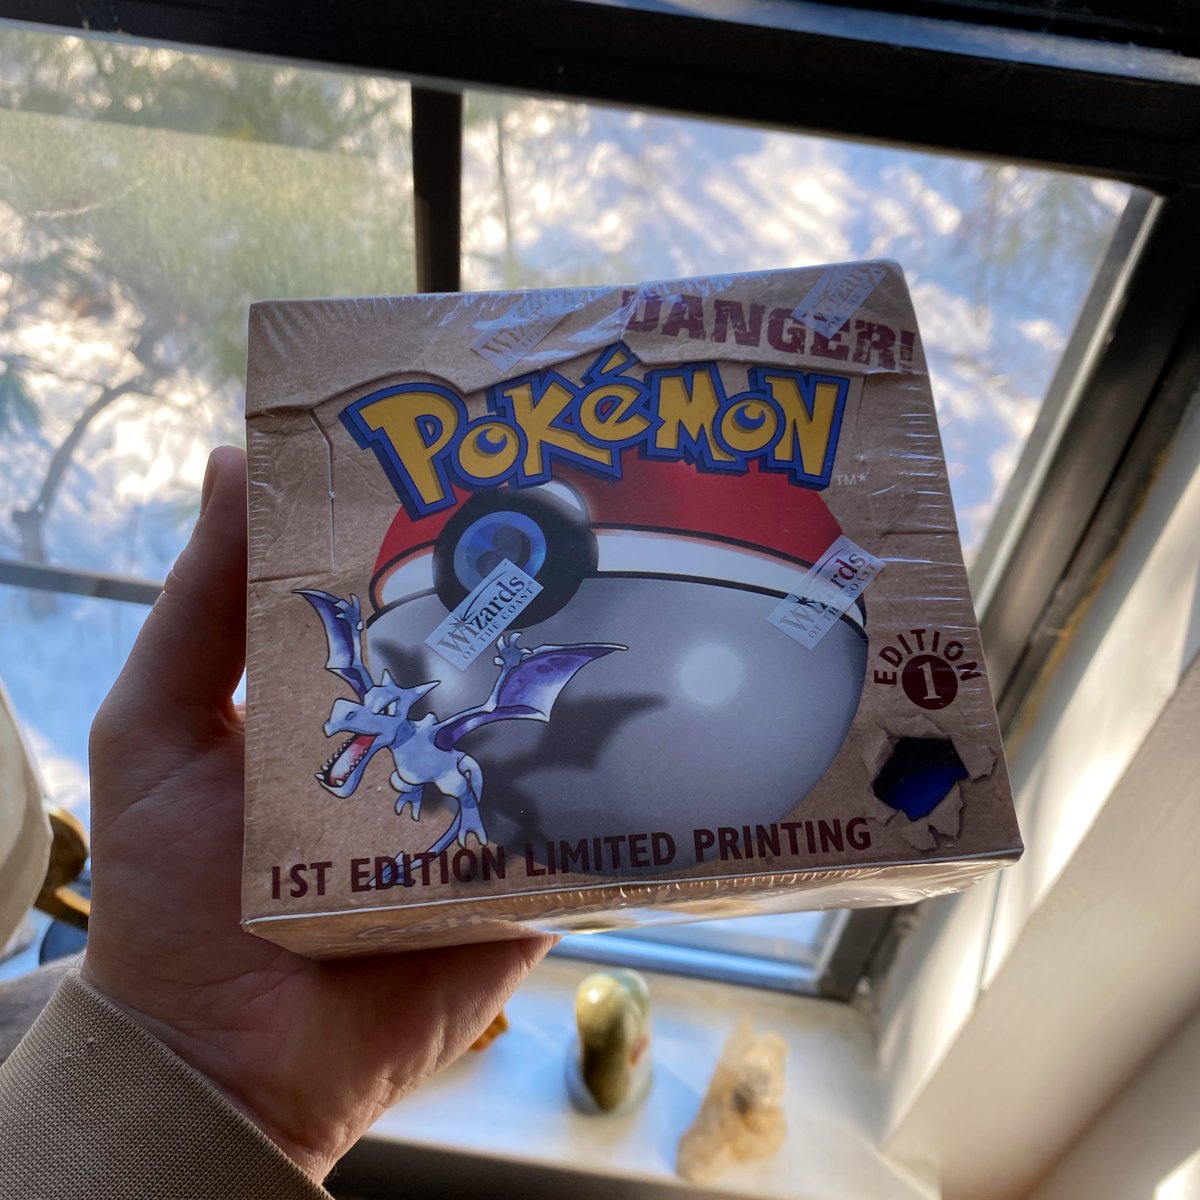 tonight we open this historic box courtesy of @ebay! hoping to get lots of great pulls. come watch for the 25th anniversary of pokémon at 9pm EST on my twitch stream. #ebaypartner

twitch.tv/chrismelberger